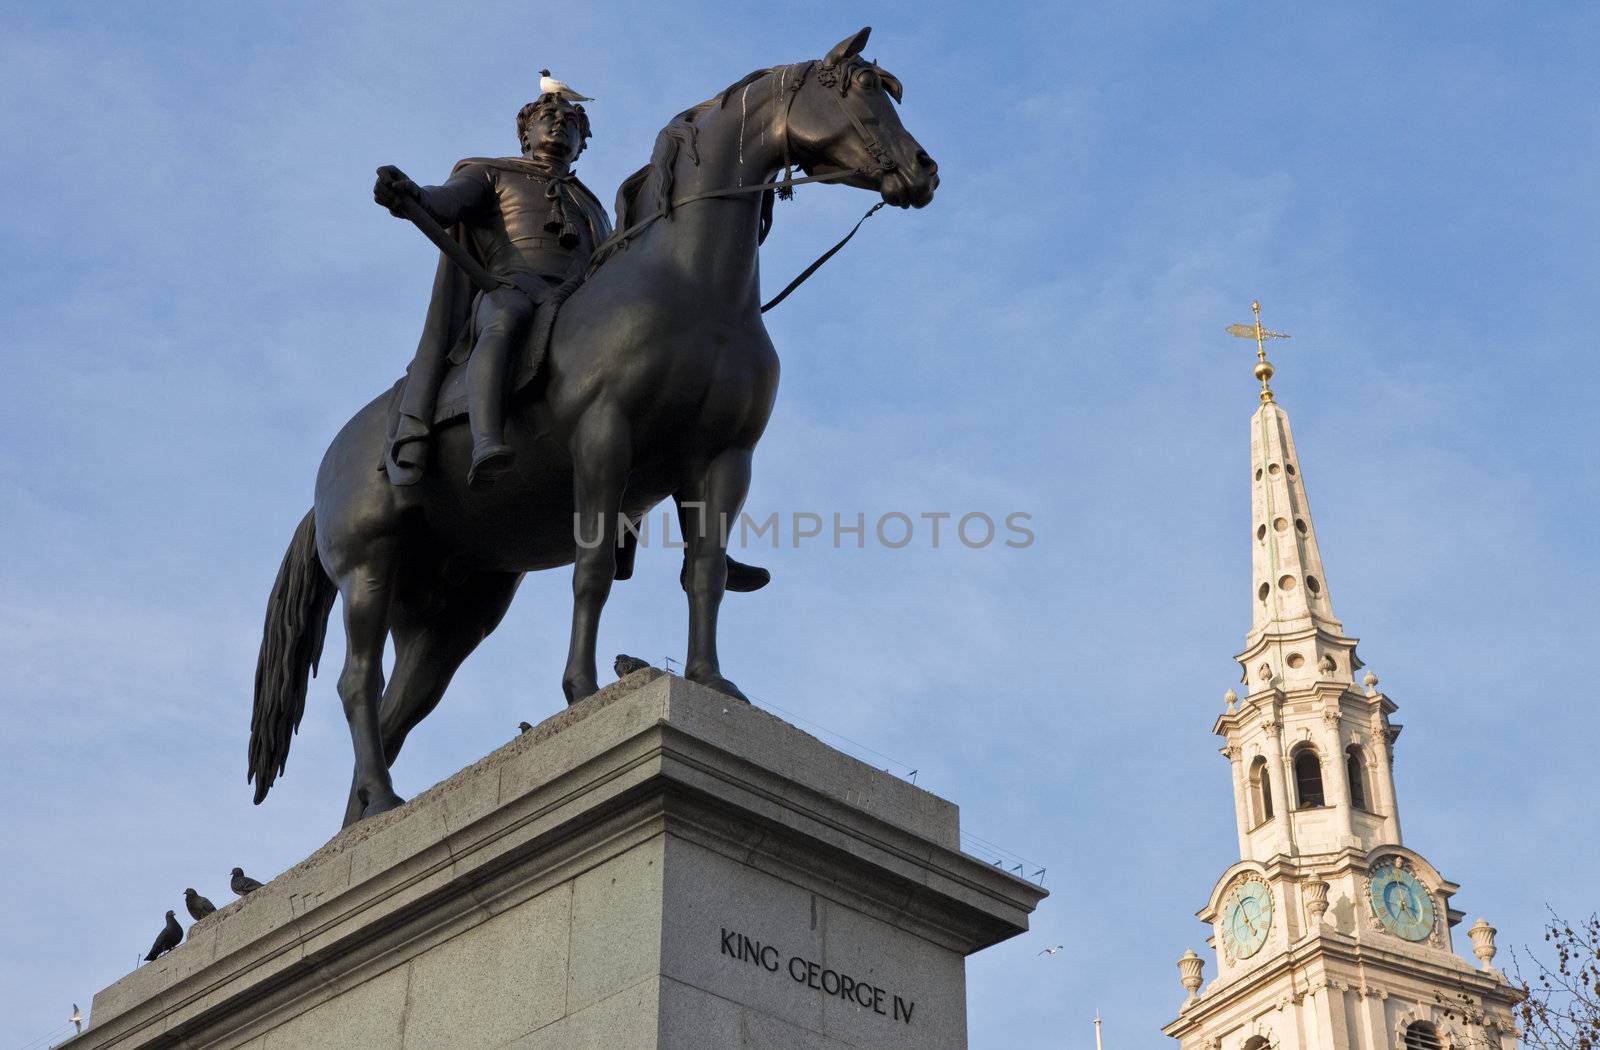 King George IV Statue and St Martin-in-the-Fields Church in London. by chrisdorney